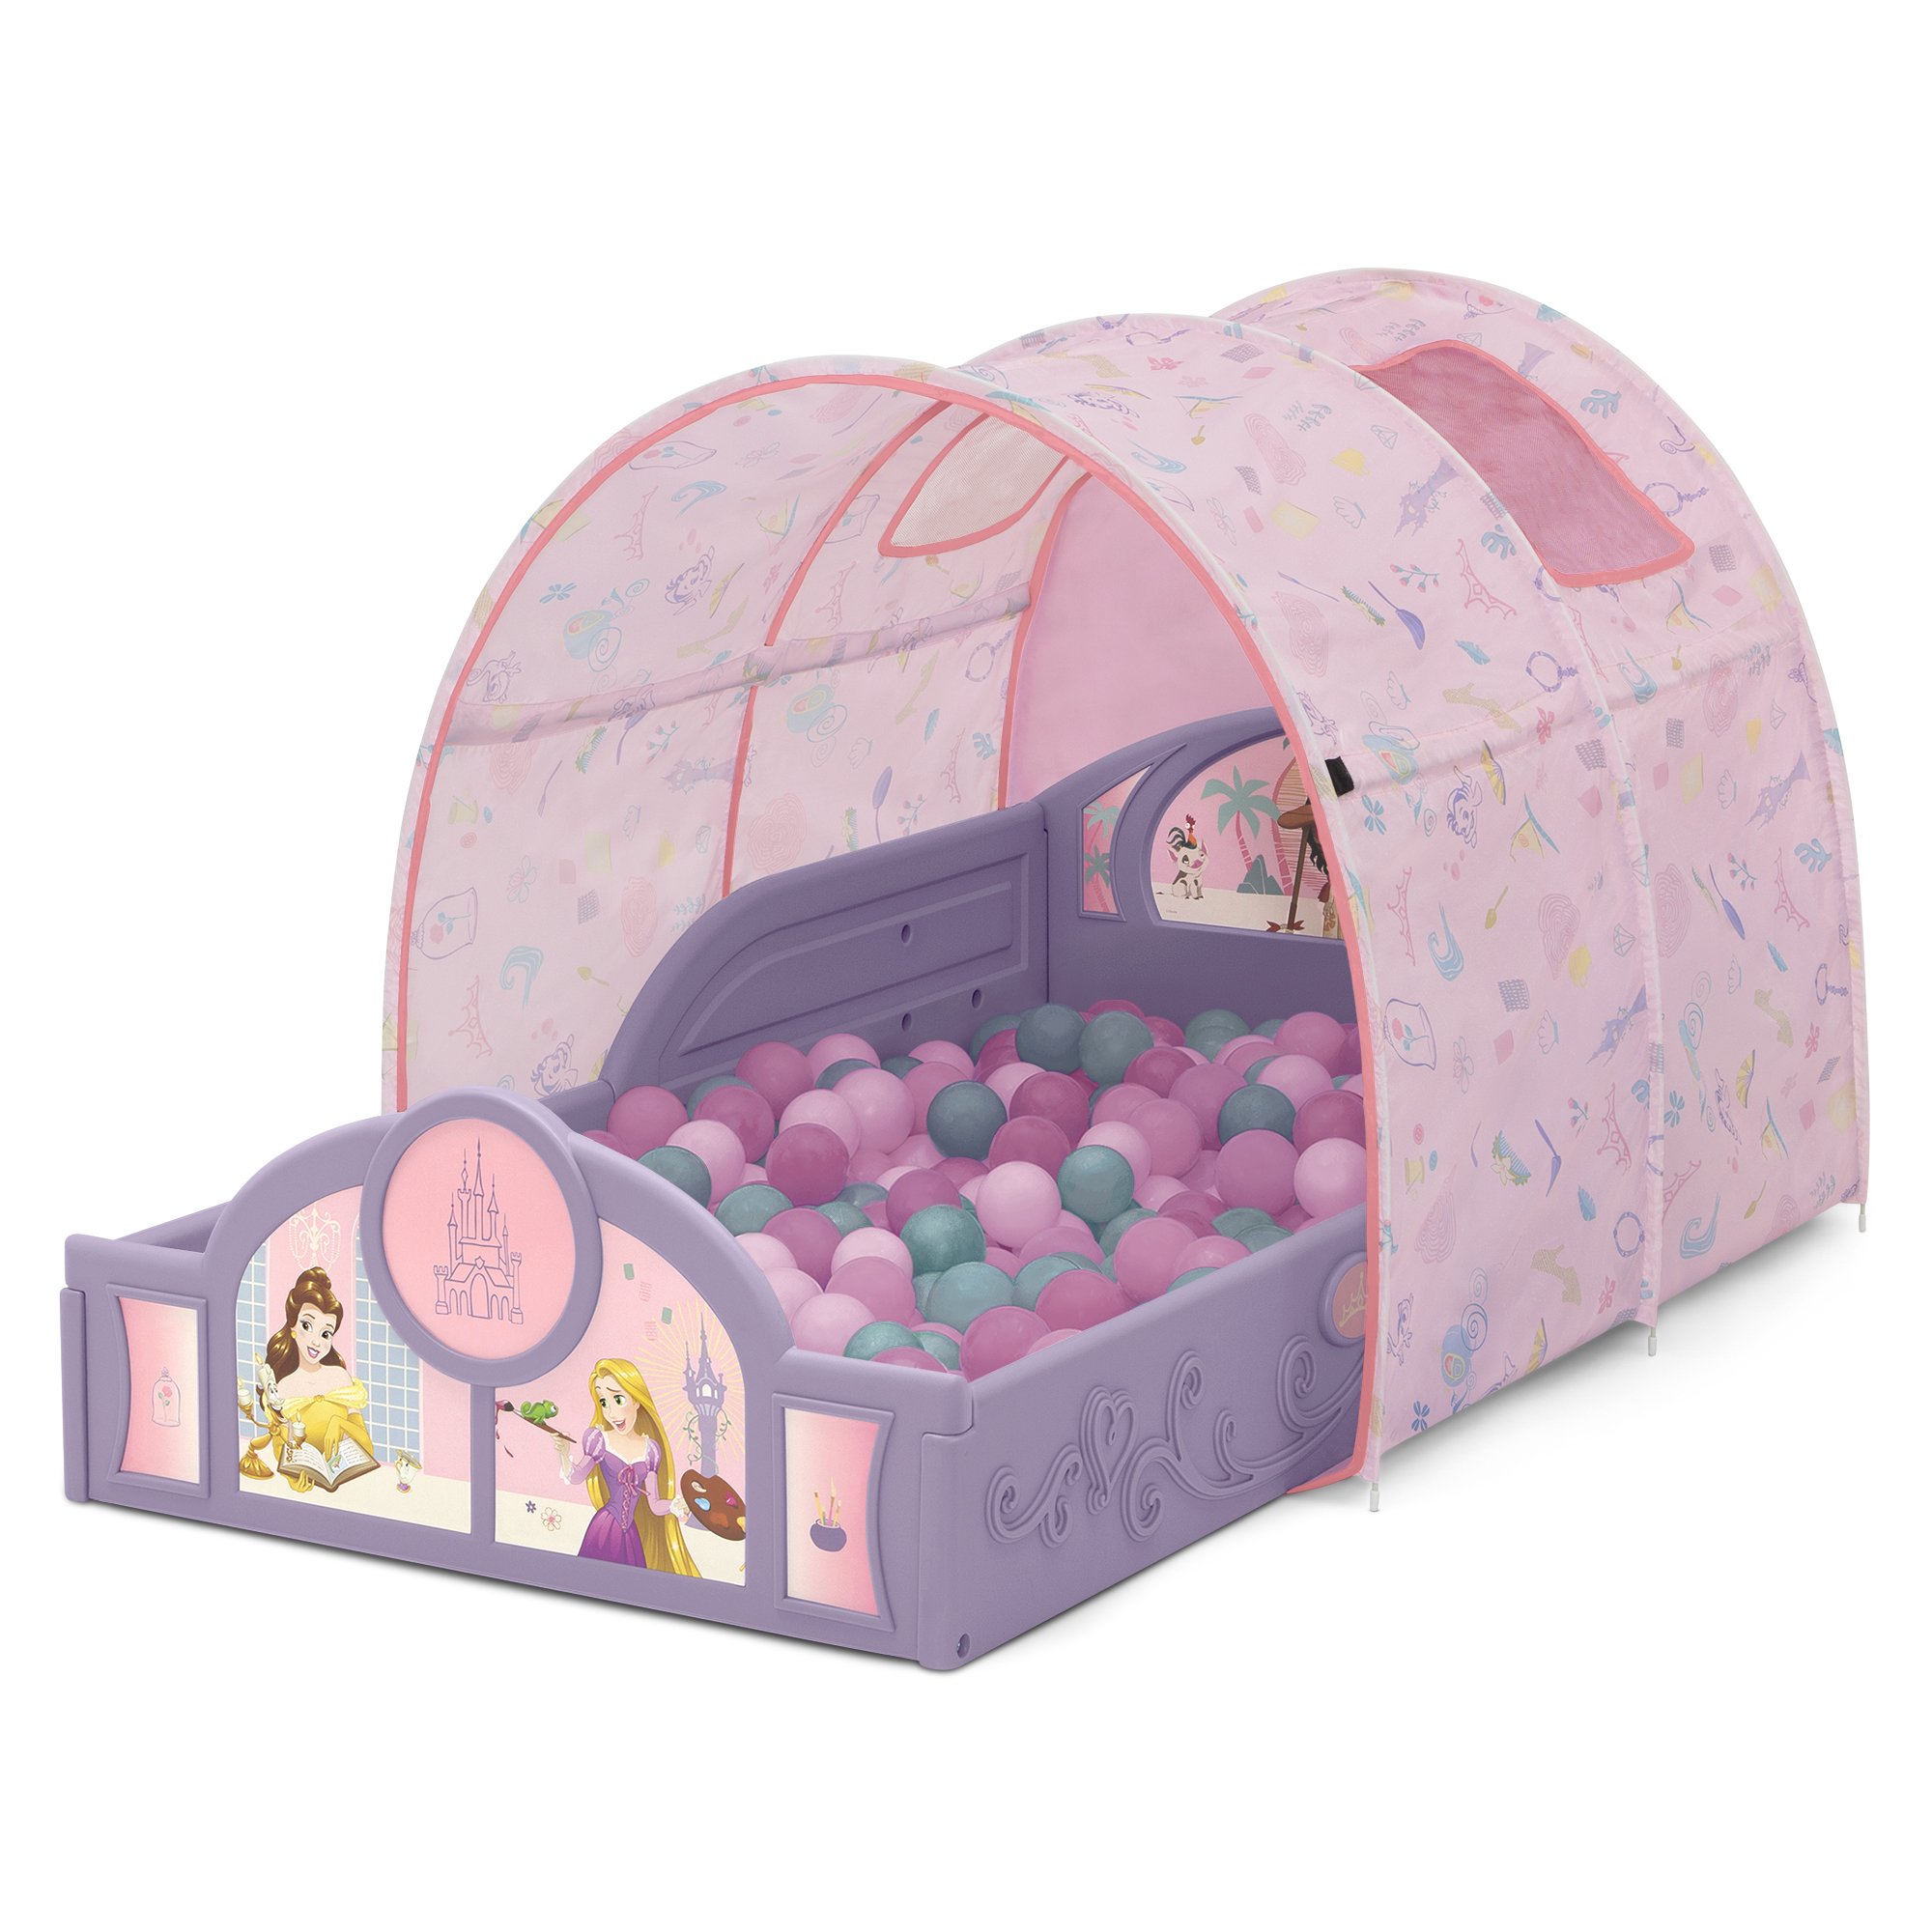 Disney Princess Sleep and Play Toddler Bed with Tent by Delta Children, Purple/Pink - image 5 of 7